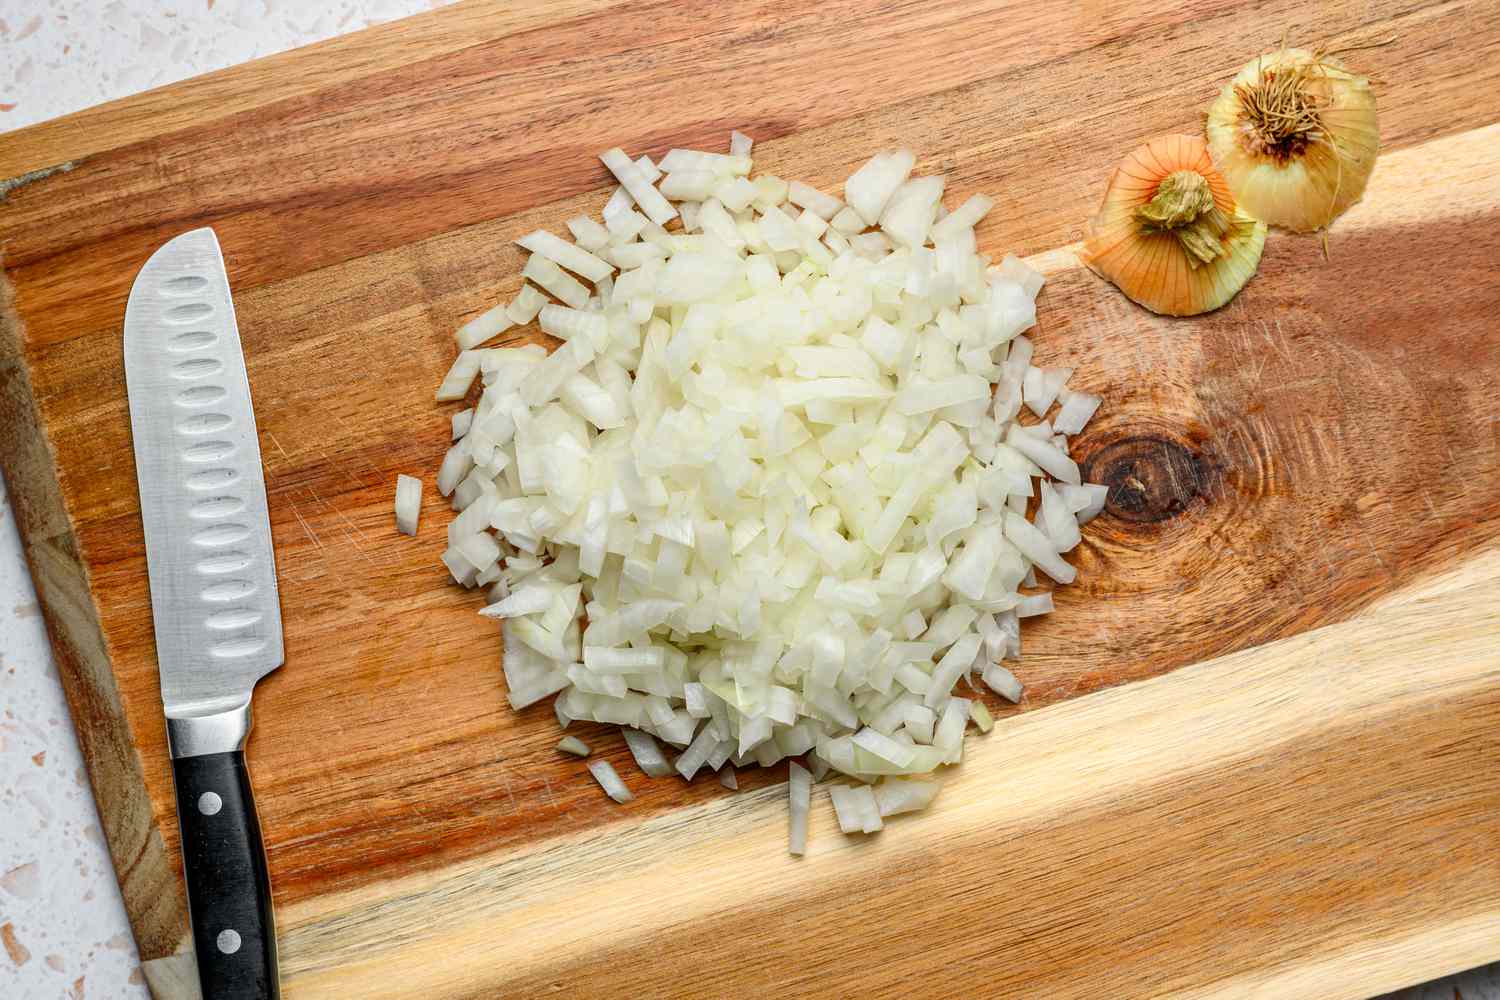 A cutting board with finely diced onion and a knife